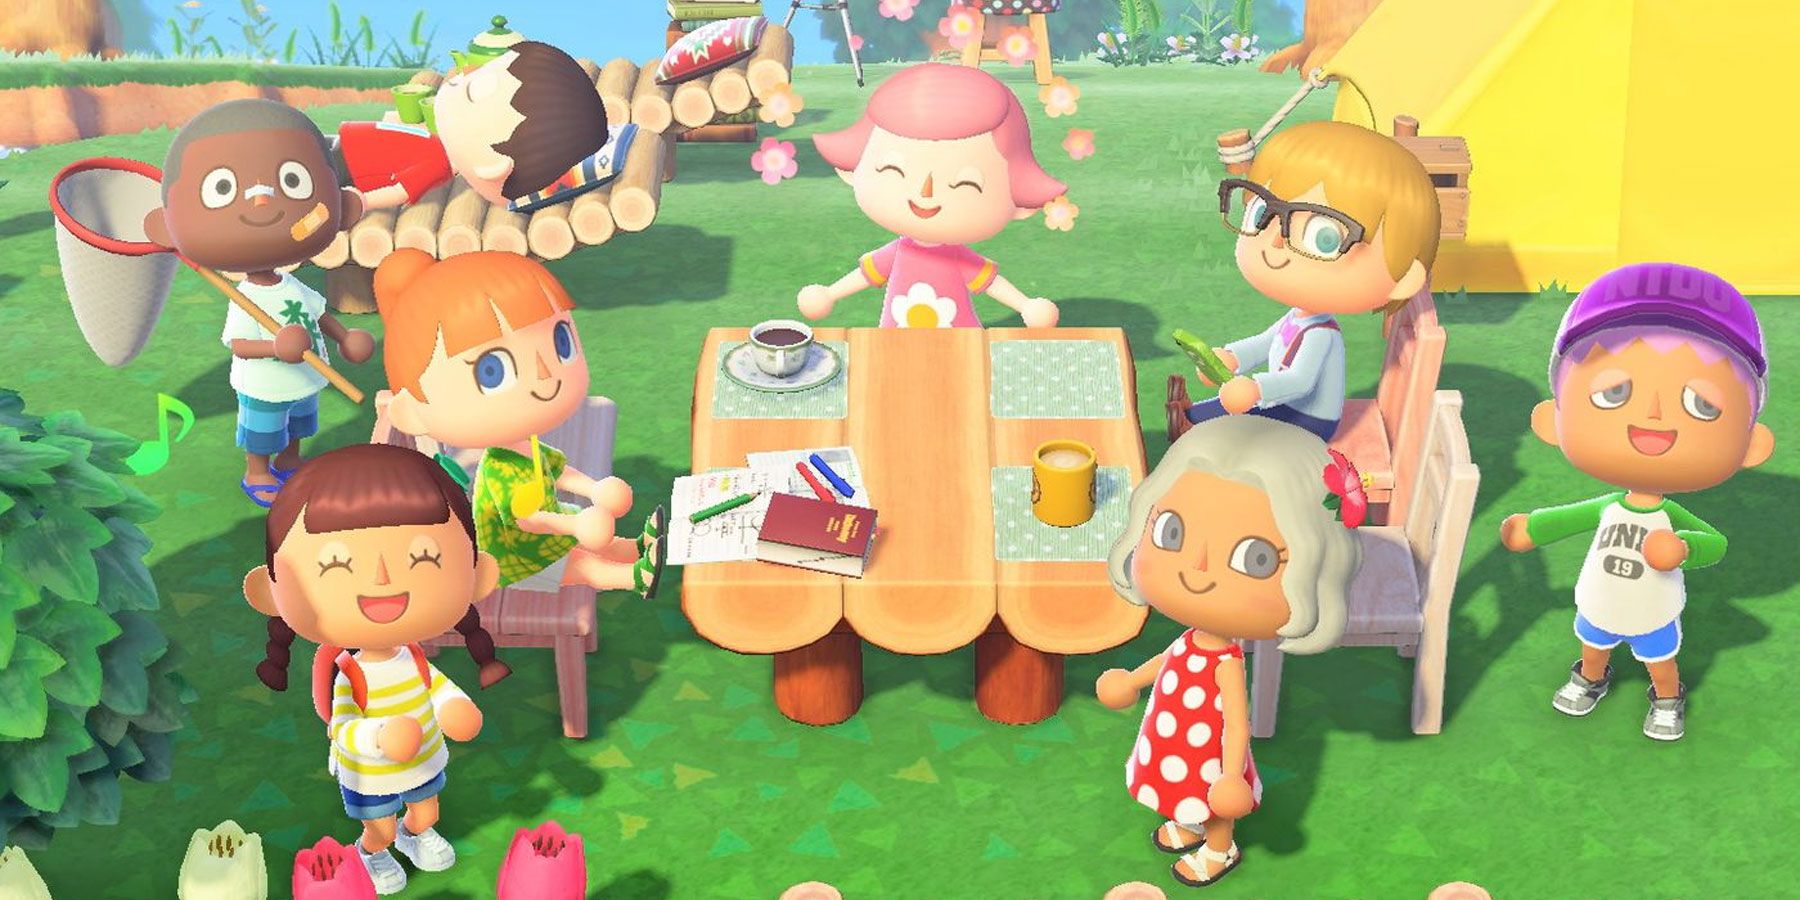 Animal Crossing New Horizons Everything Substantial Added in the New